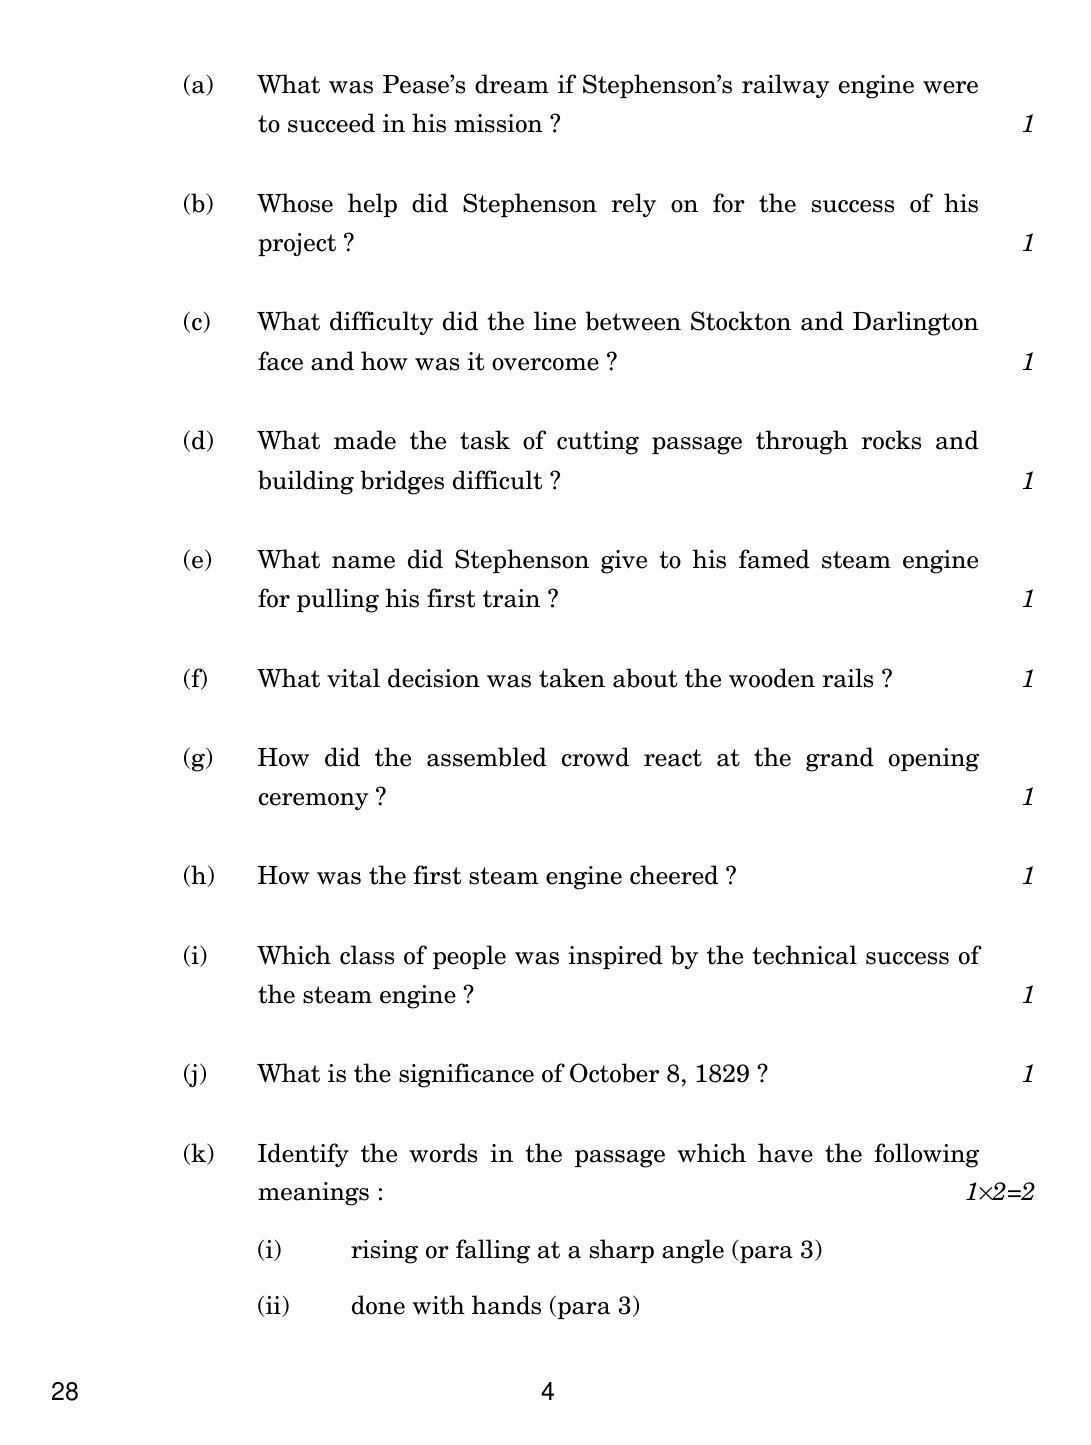 CBSE Class 12 28 ENGLISH ELECTIVE NCERT 2018 Question Paper - Page 4